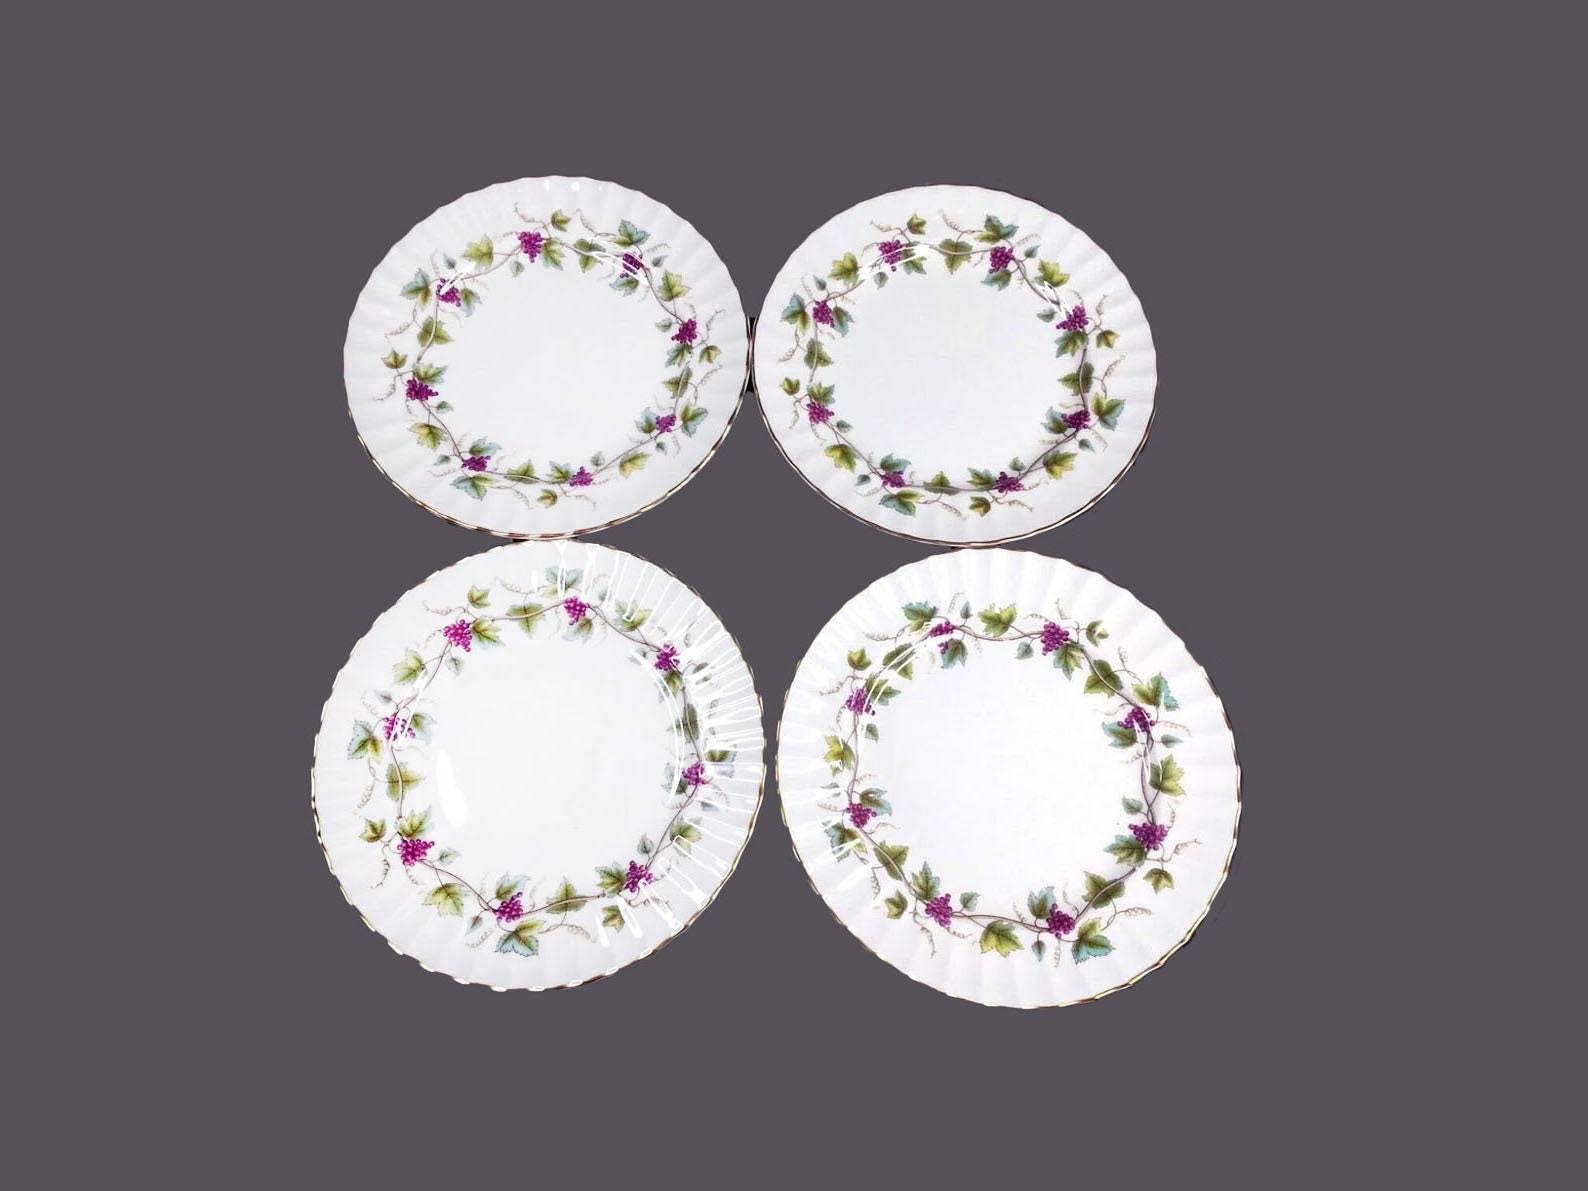 Royal Worcester Bacchanal White salad plates. Bone china made in England. - $45.38 - $59.92